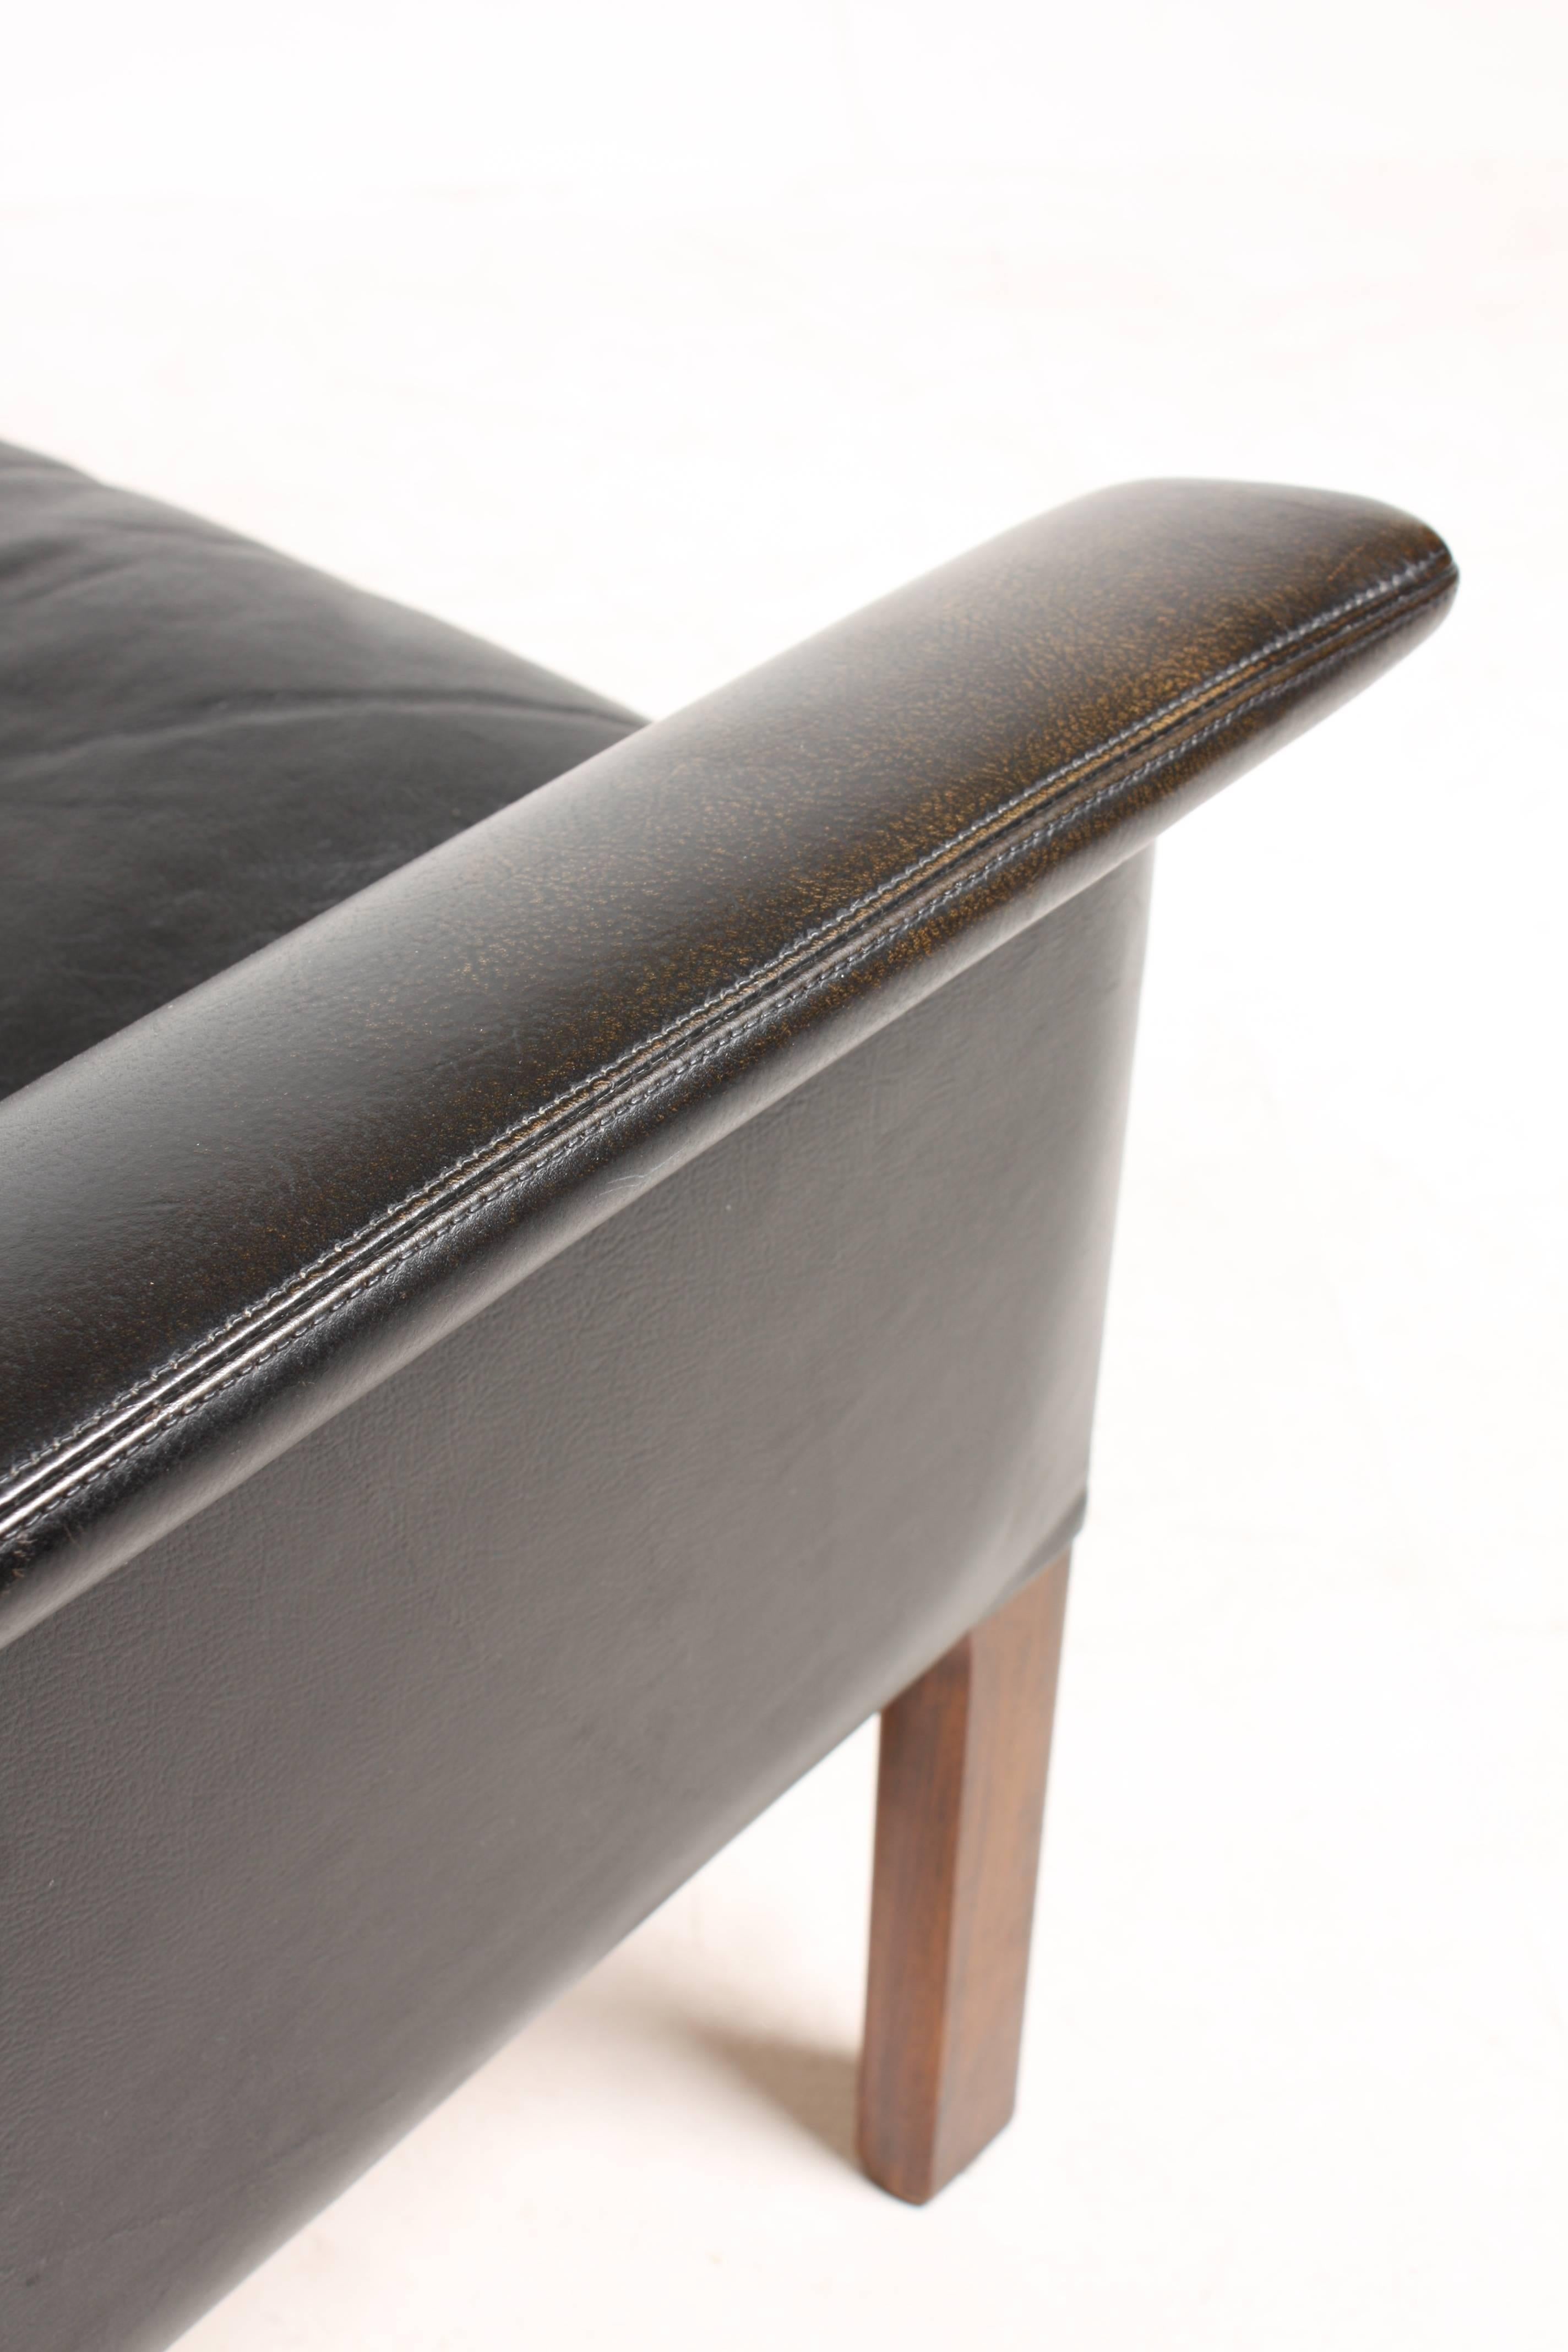 Scandinavian Modern Sofa in Patinated Leather by Hans Olsen